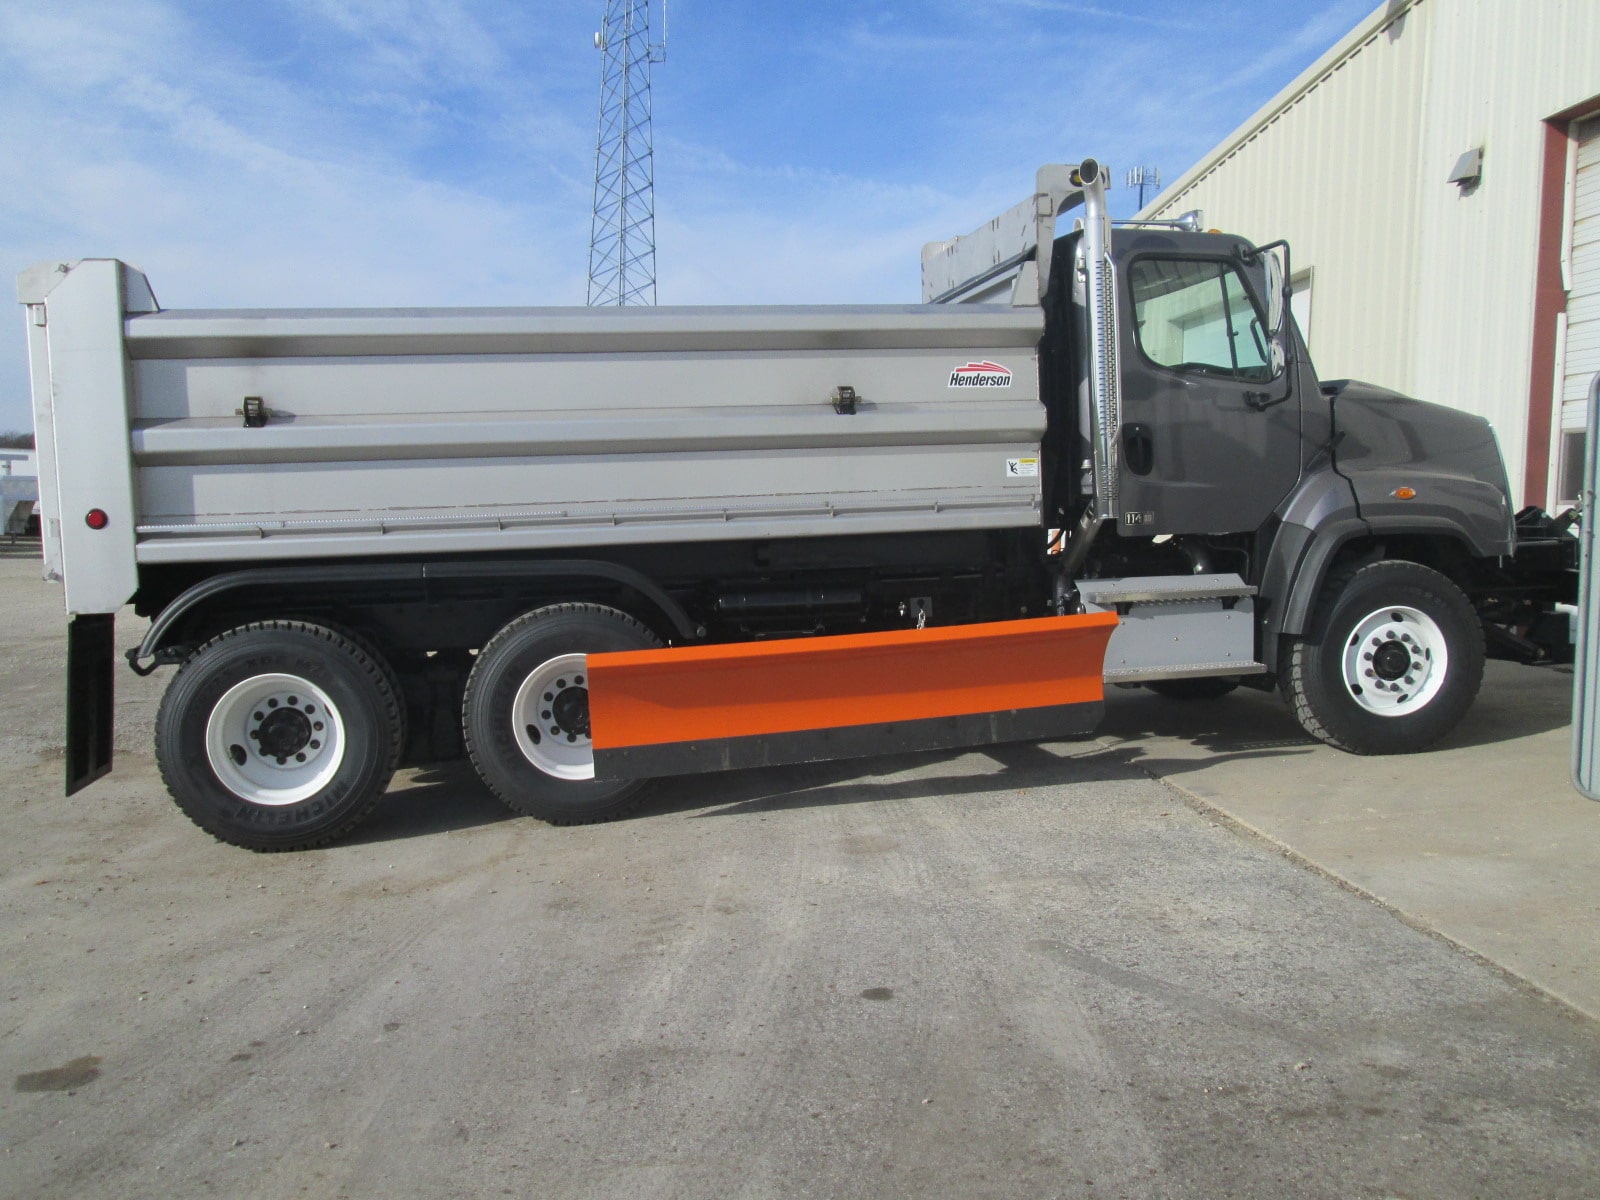 Images of trucks we have completed